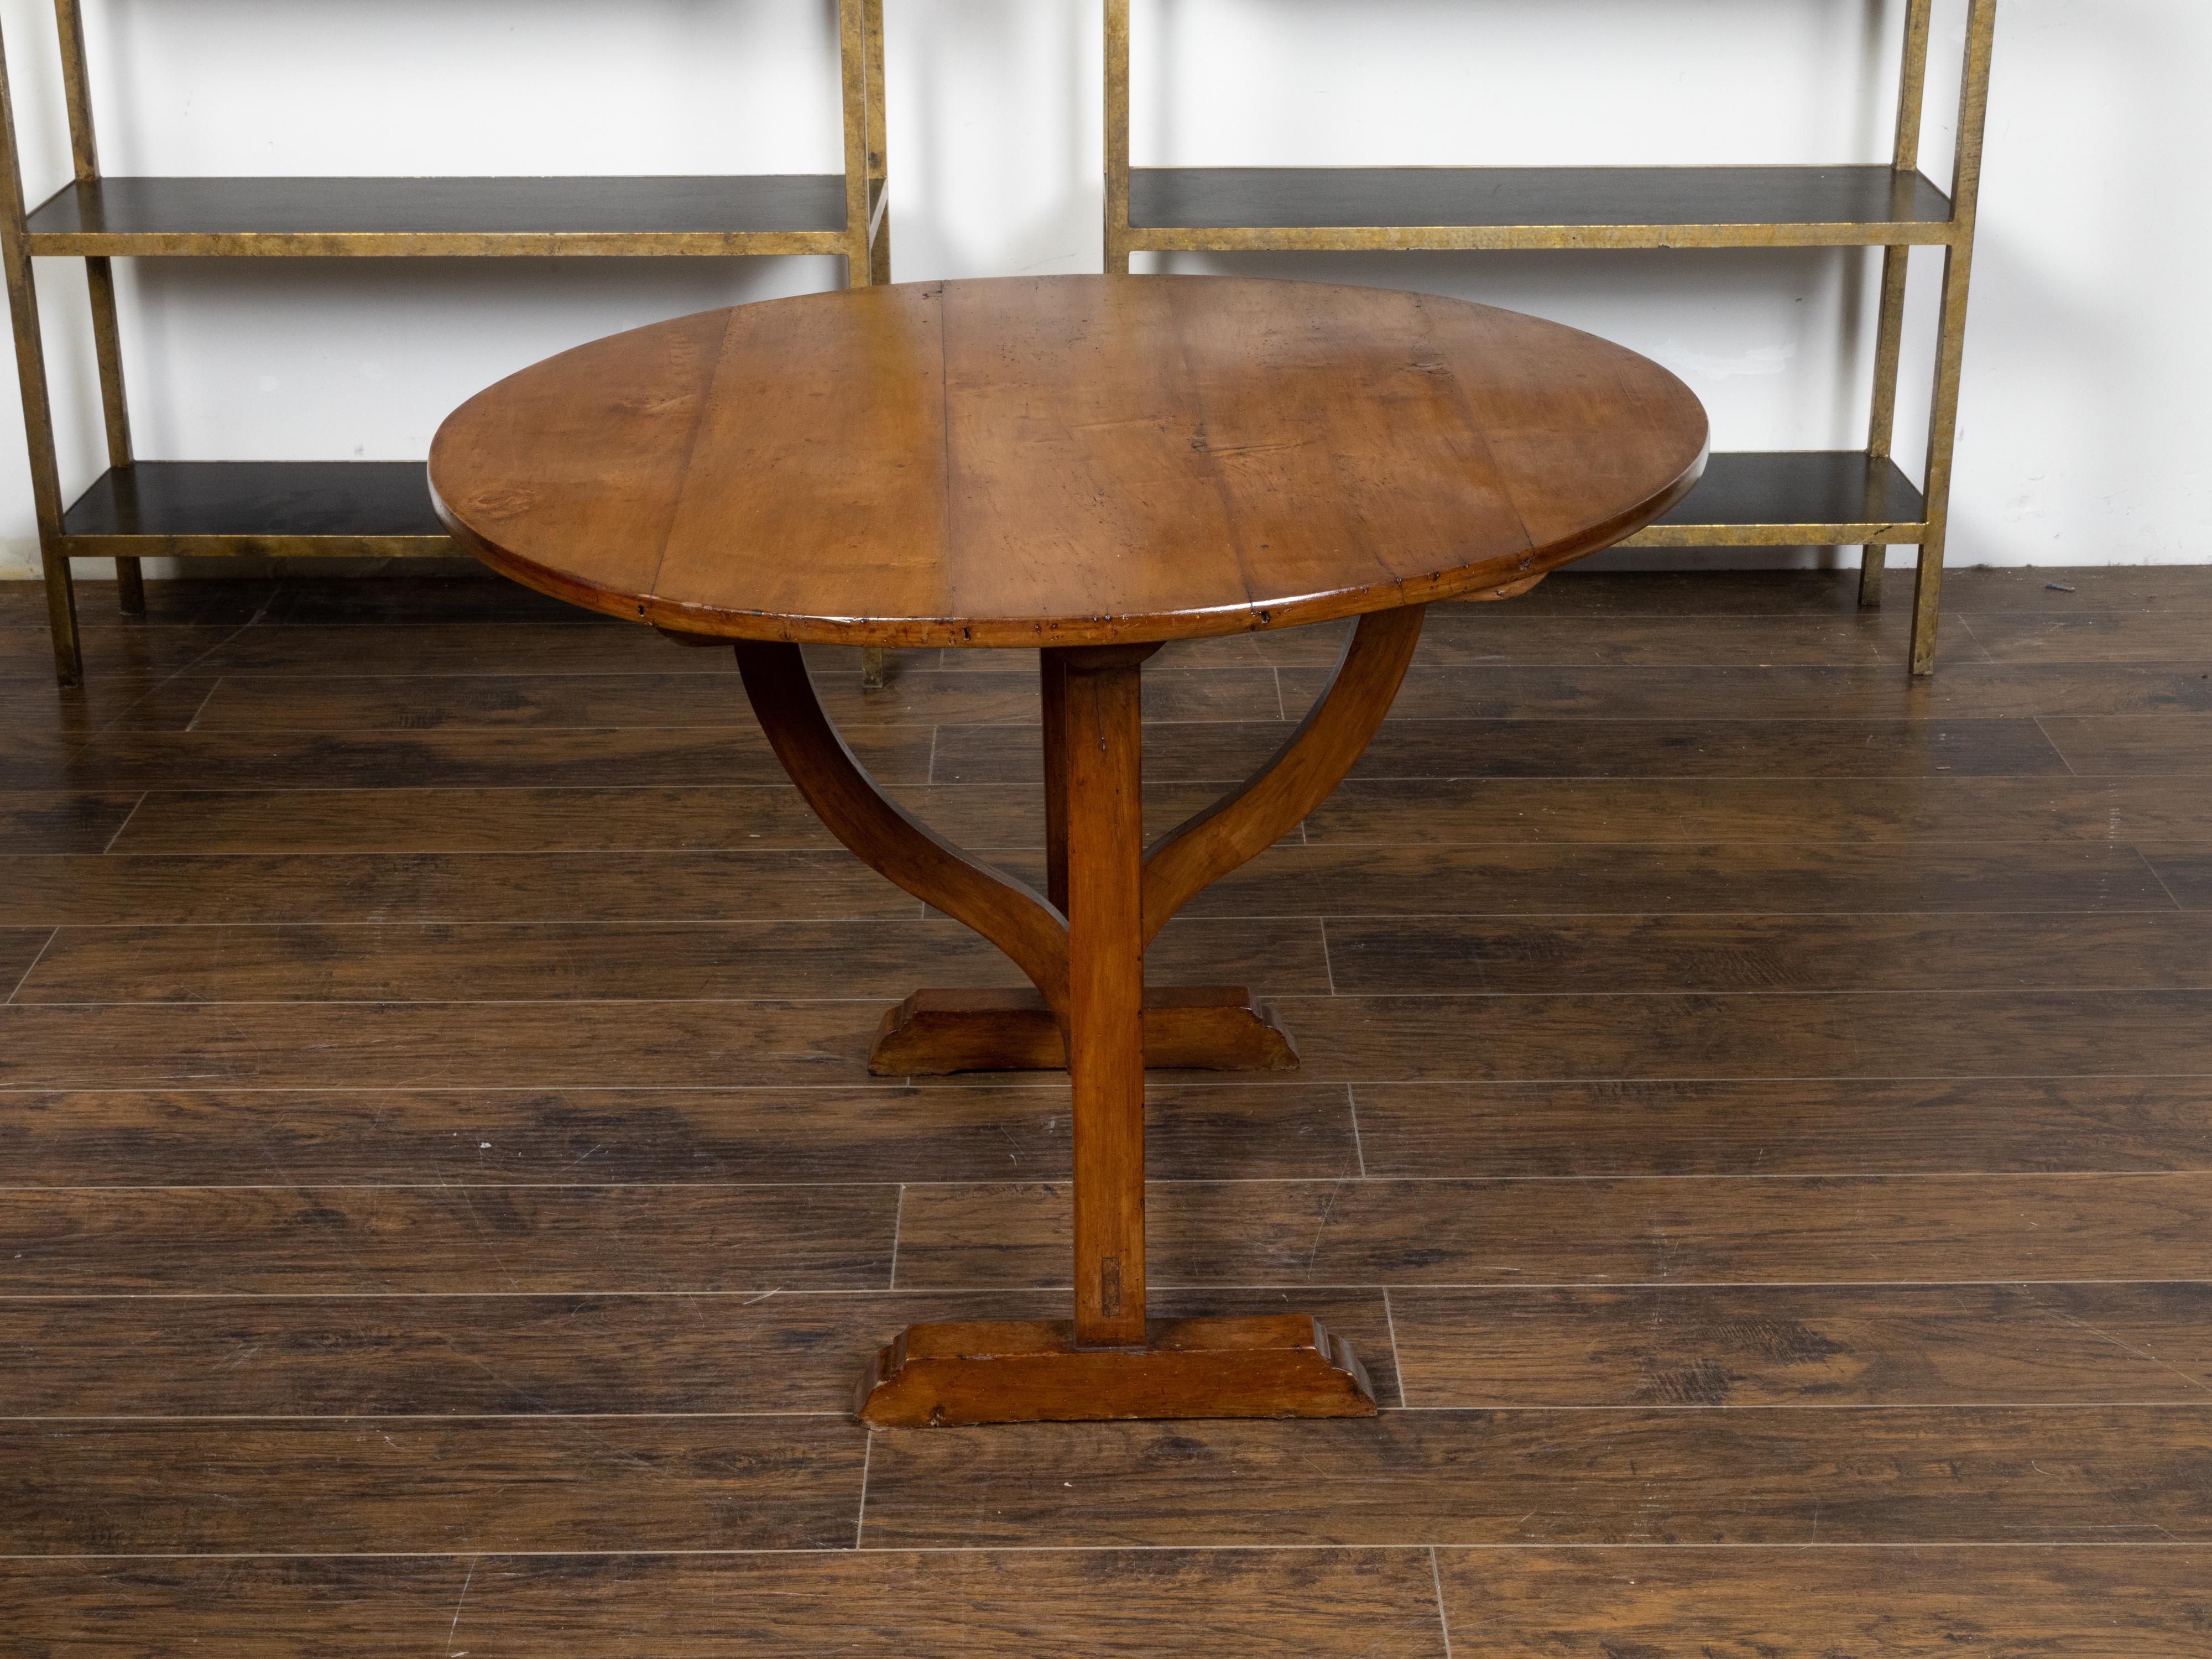 French 19th Century Walnut Wine Tasting Tilt-Top Table with Circular Top 1